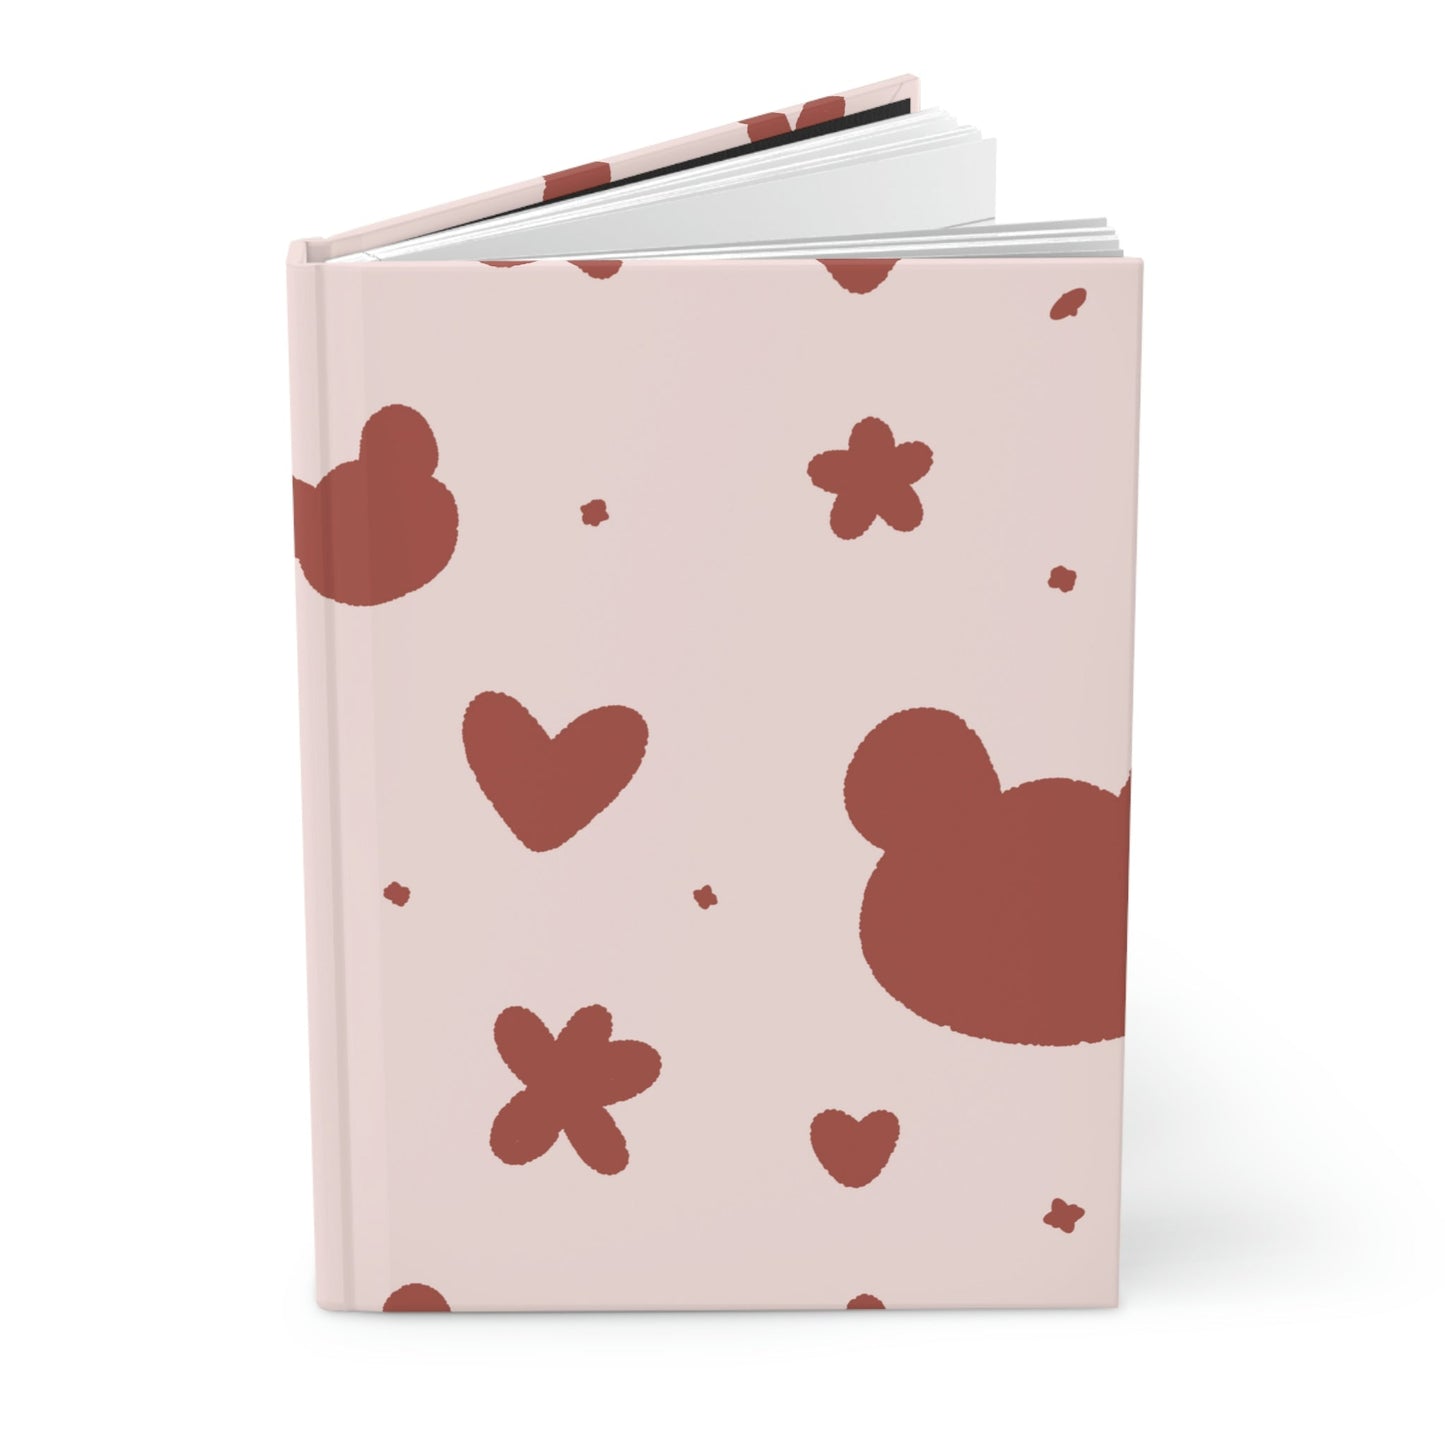 Cuddly Teddy Hardcover Matte Journal Paper products Pink Sweetheart